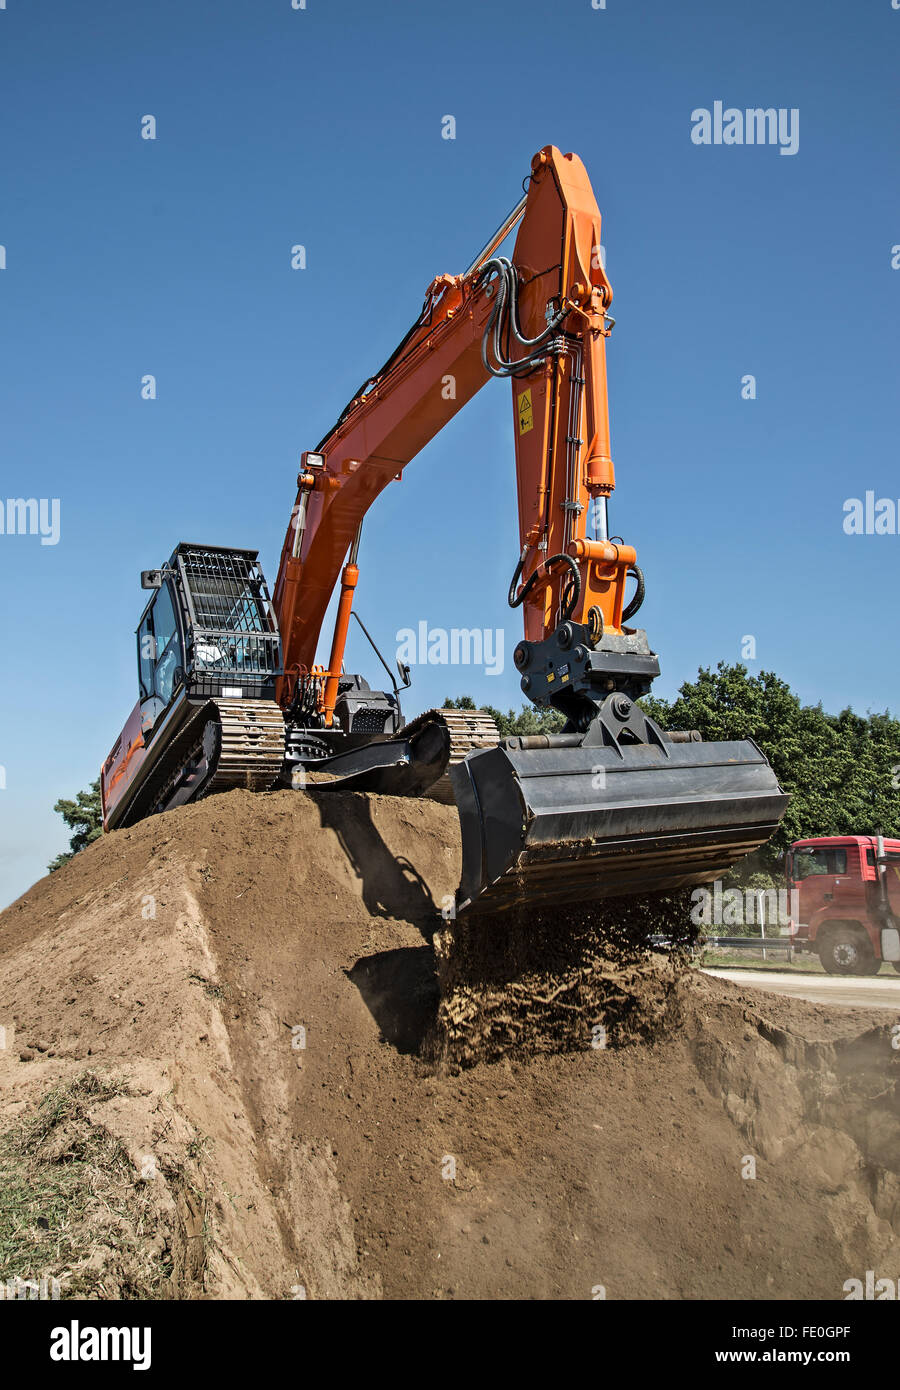 Tracked excavator on a construction site Stock Photo